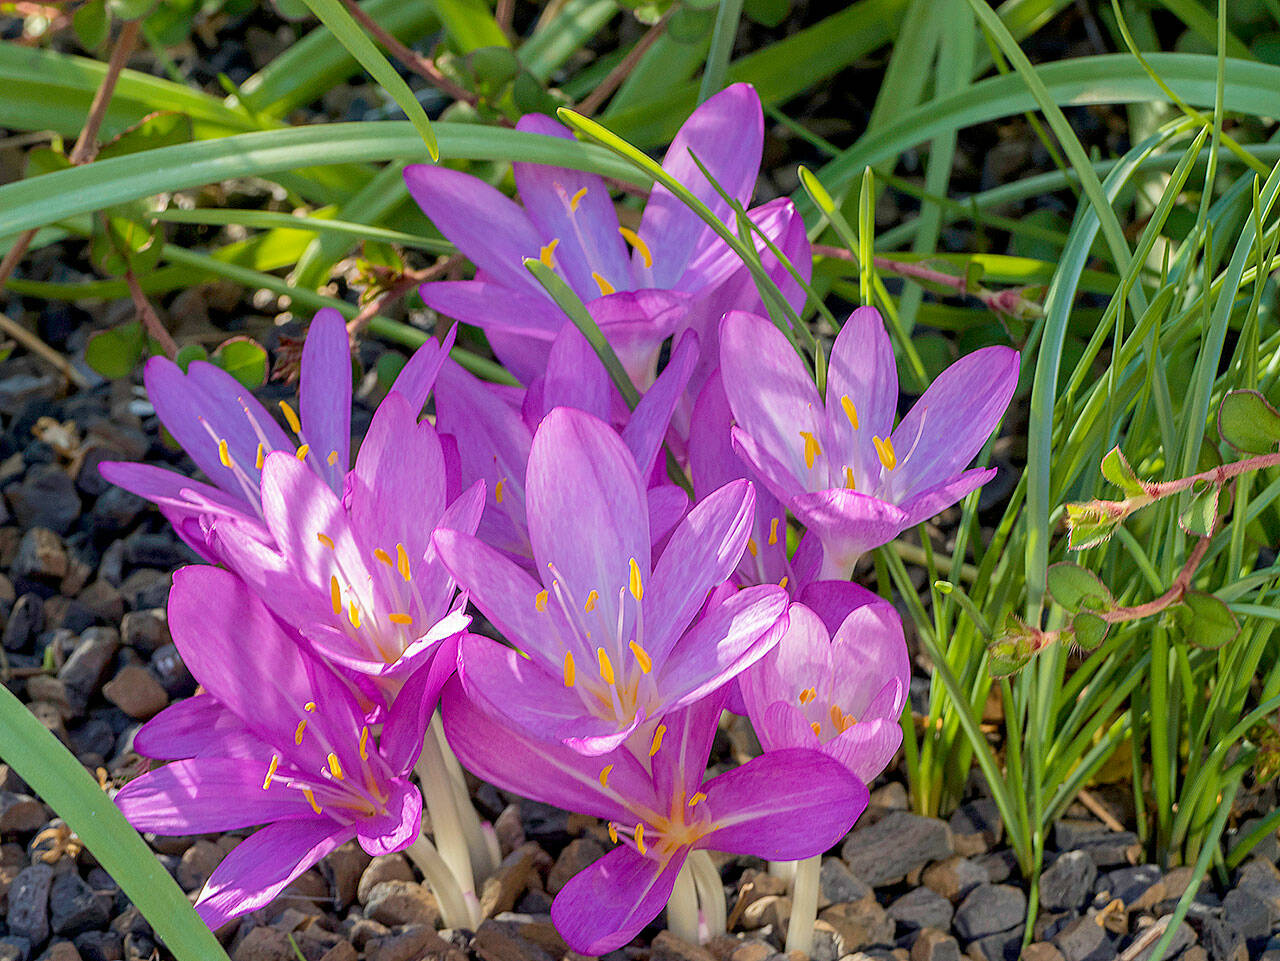 Autumn crocus is one of two types of fall-blooming bulbs available in garden centers now. (Getty Images)